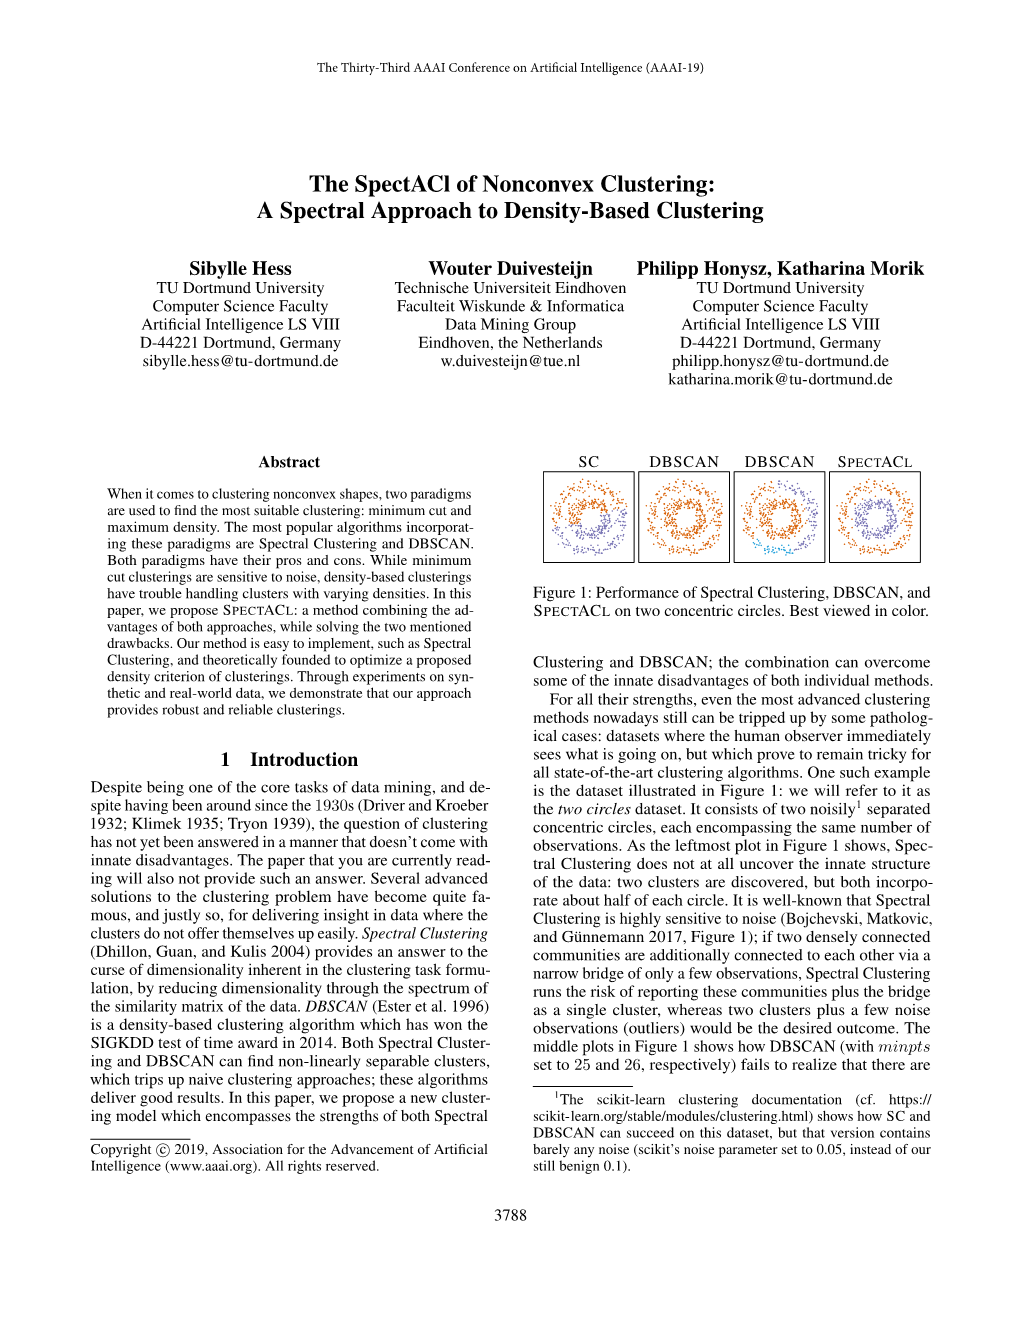 A Spectral Approach to Density-Based Clustering